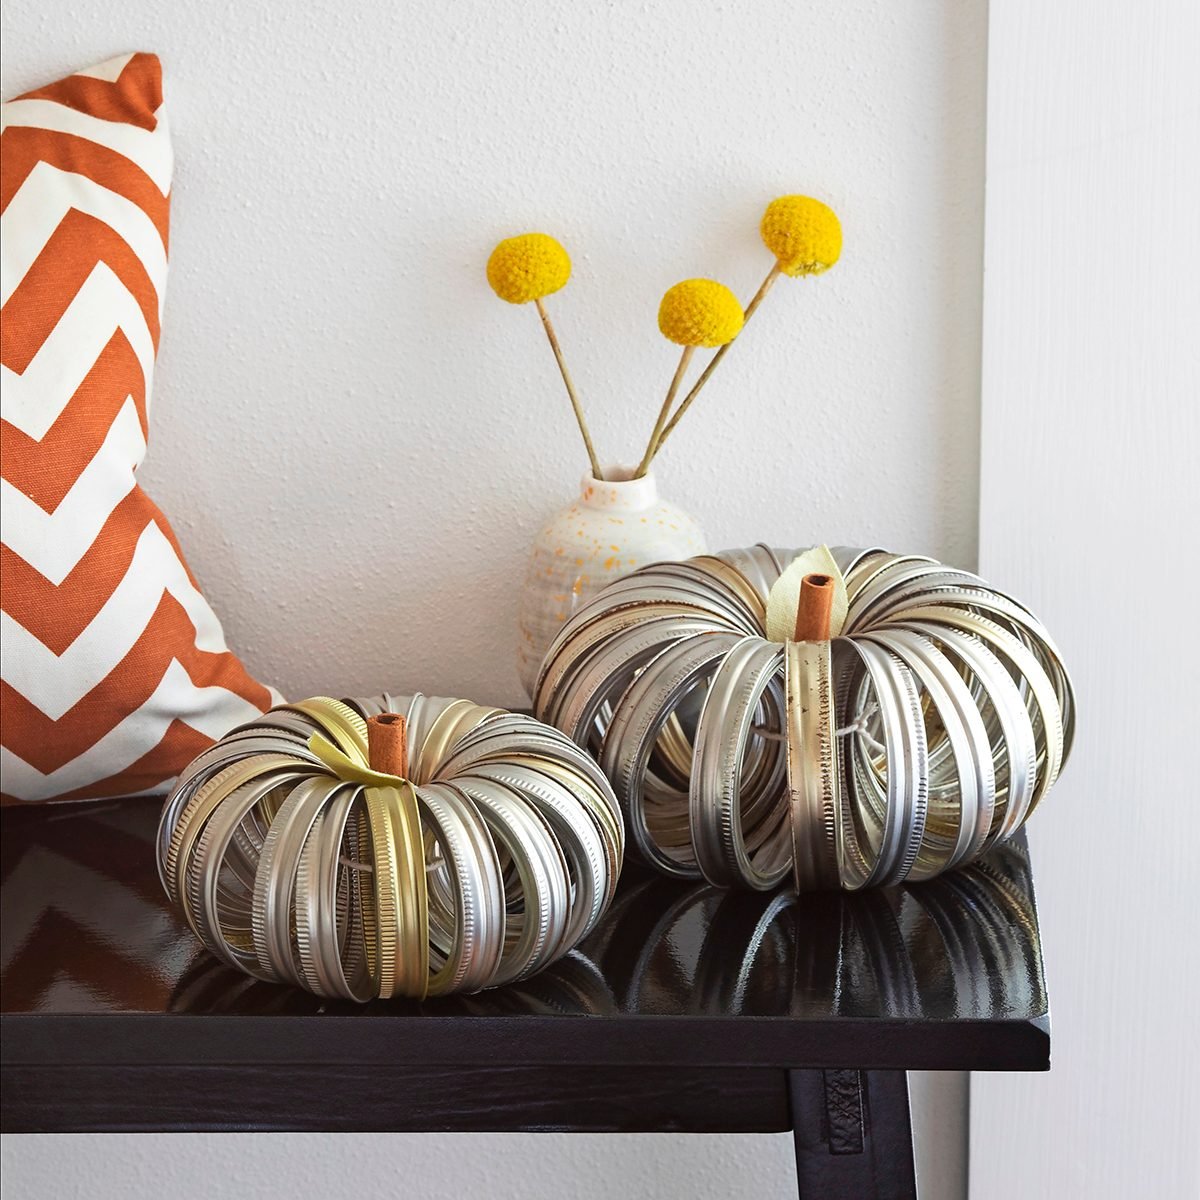 Look What I Did With Styrofoam Balls! 3 Different Fall Decor Ideas 